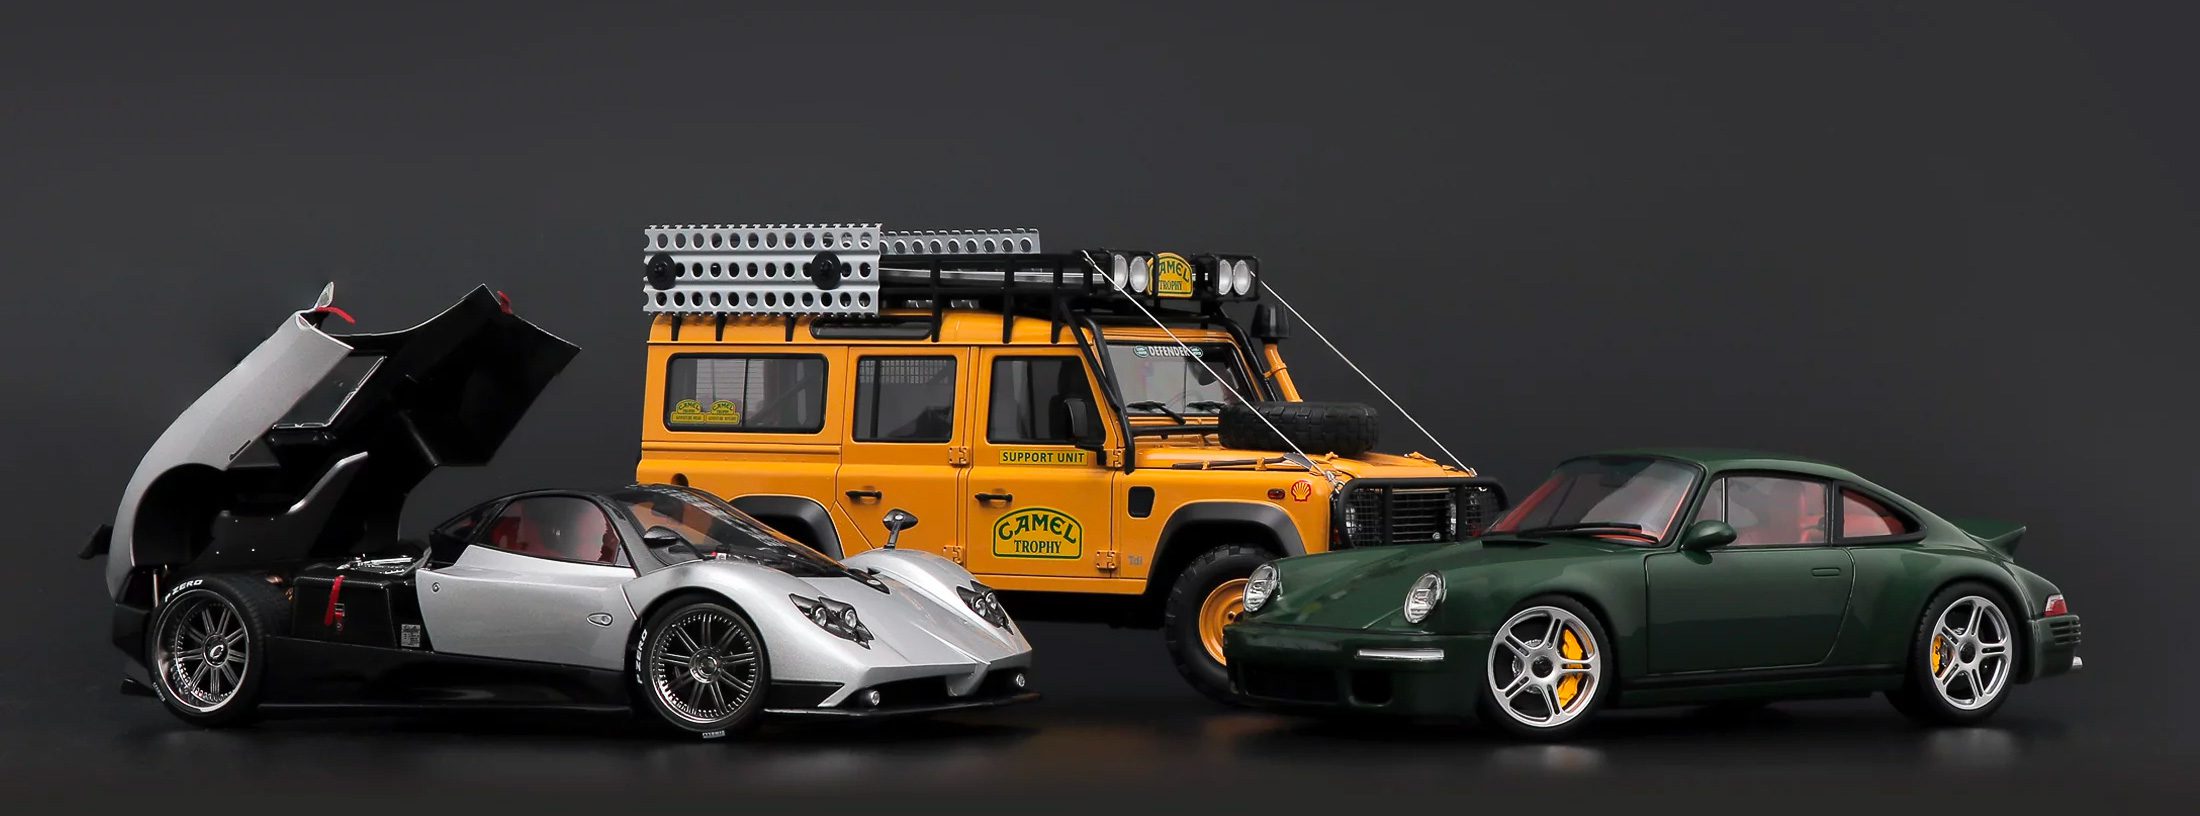 Diecast cars homepage banner